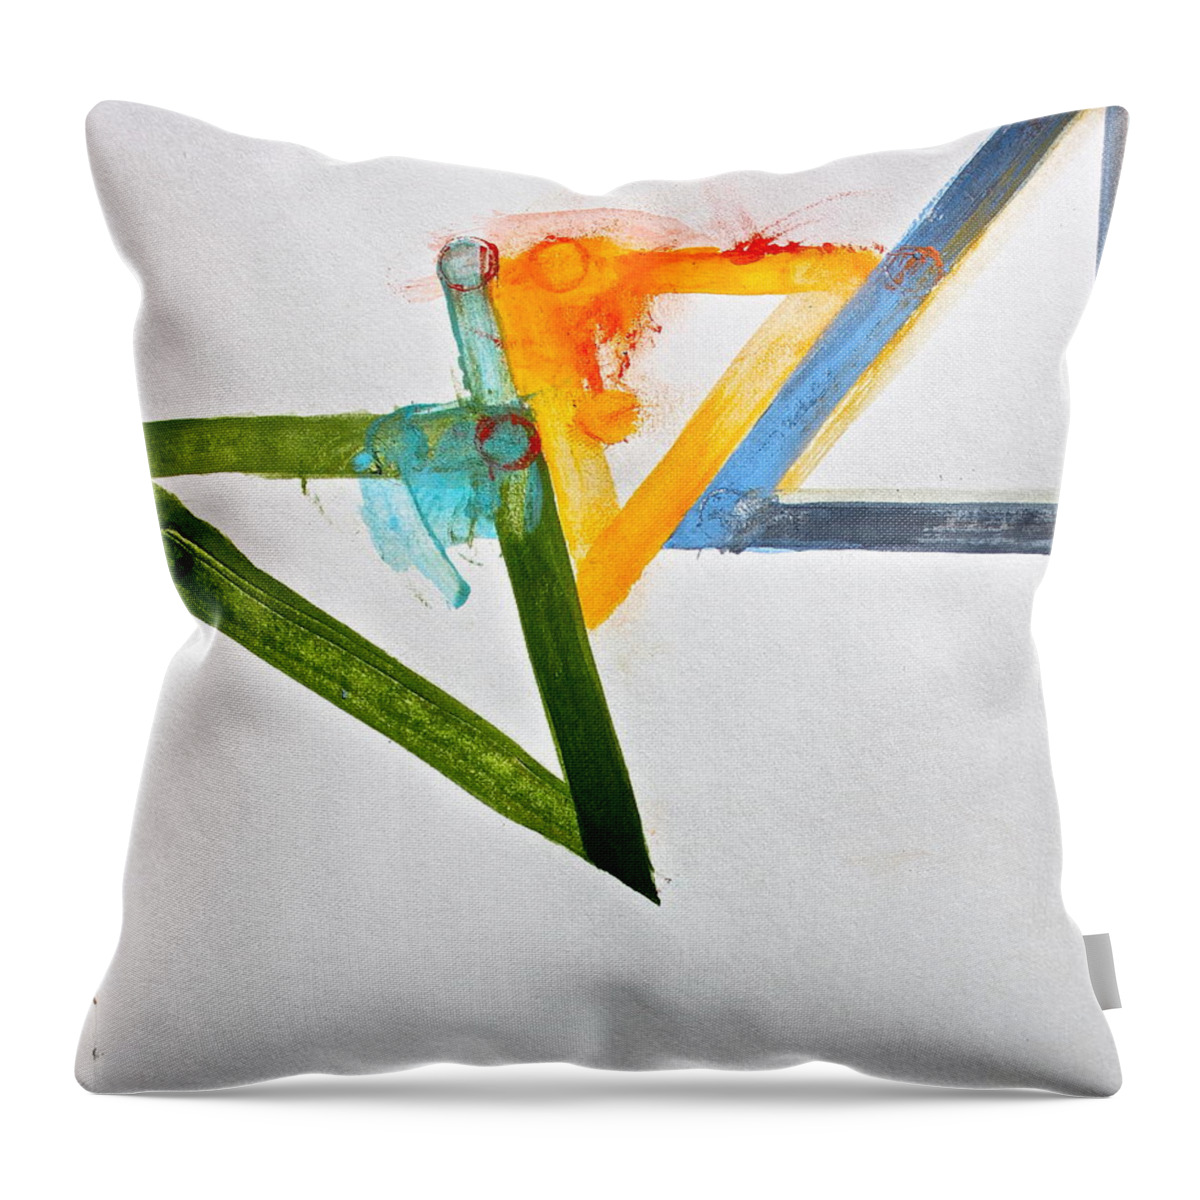 Abstract Paintings Throw Pillow featuring the painting High Noon by Cliff Spohn